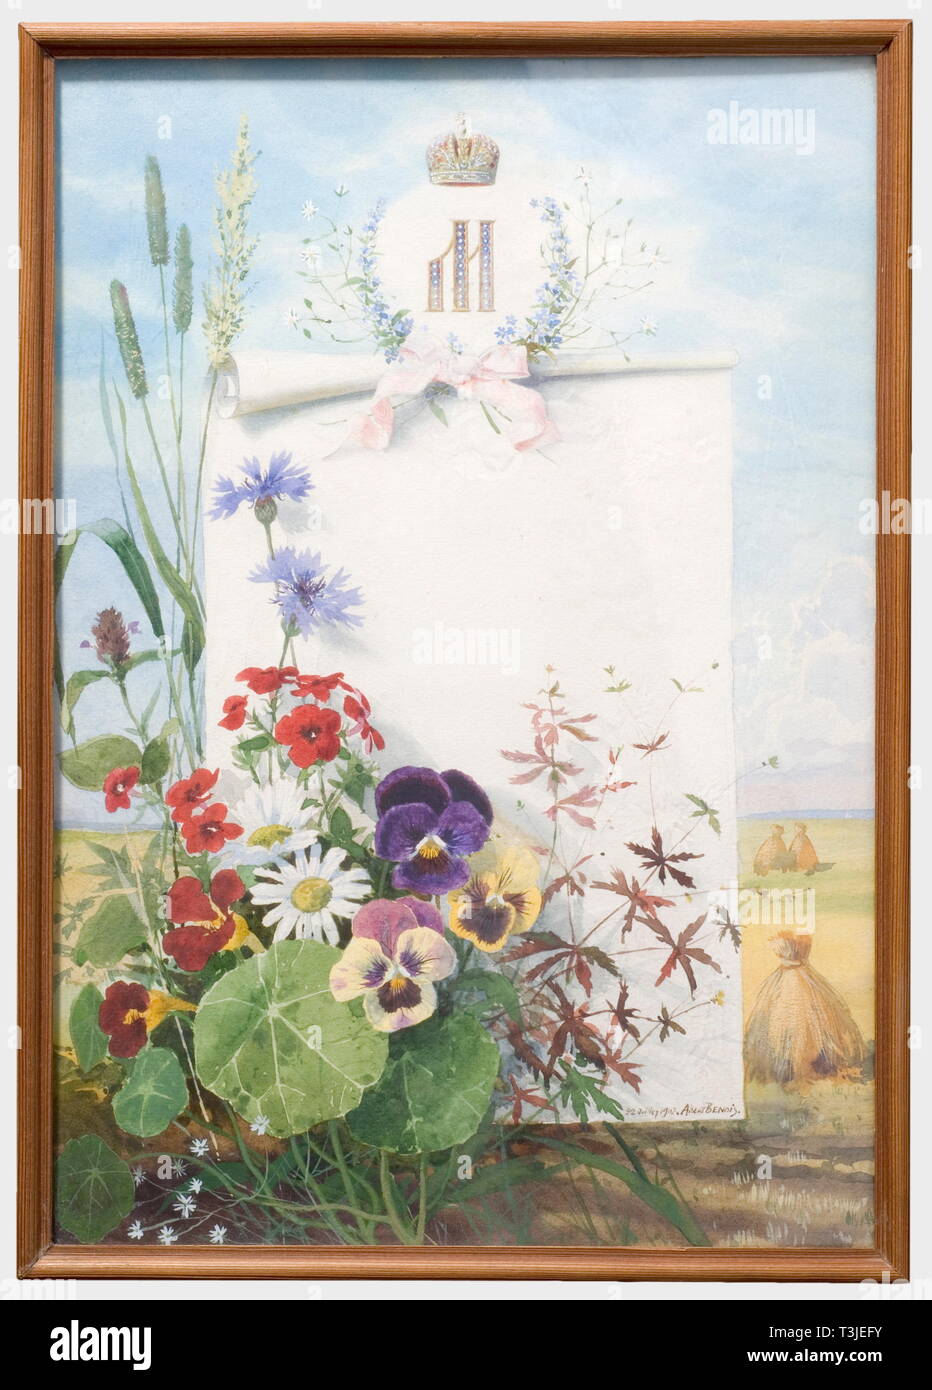 Albert Nikolaevich Benois (1852 - 1936), a menu card for Maria Feodorovna (1847 - 1928), dated 1902 Watercolour on paper, gold trim cardboard. Elaborately painted summer flowers, in the background hay huts in the field. Blank menu card, the upper section emblazoned with the Cyrillic character 'M' under a Russian grand duke's crown. Signed and dated '22 Juillet 1902 Albert Benois'. Dimensions 38.5 x 27 cm. Under glass, wood frame, on the verso collection number and old Russian stamp. Albert Benois, one of the most renowned Russian watercolourists,, Additional-Rights-Clearance-Info-Not-Available Stock Photo